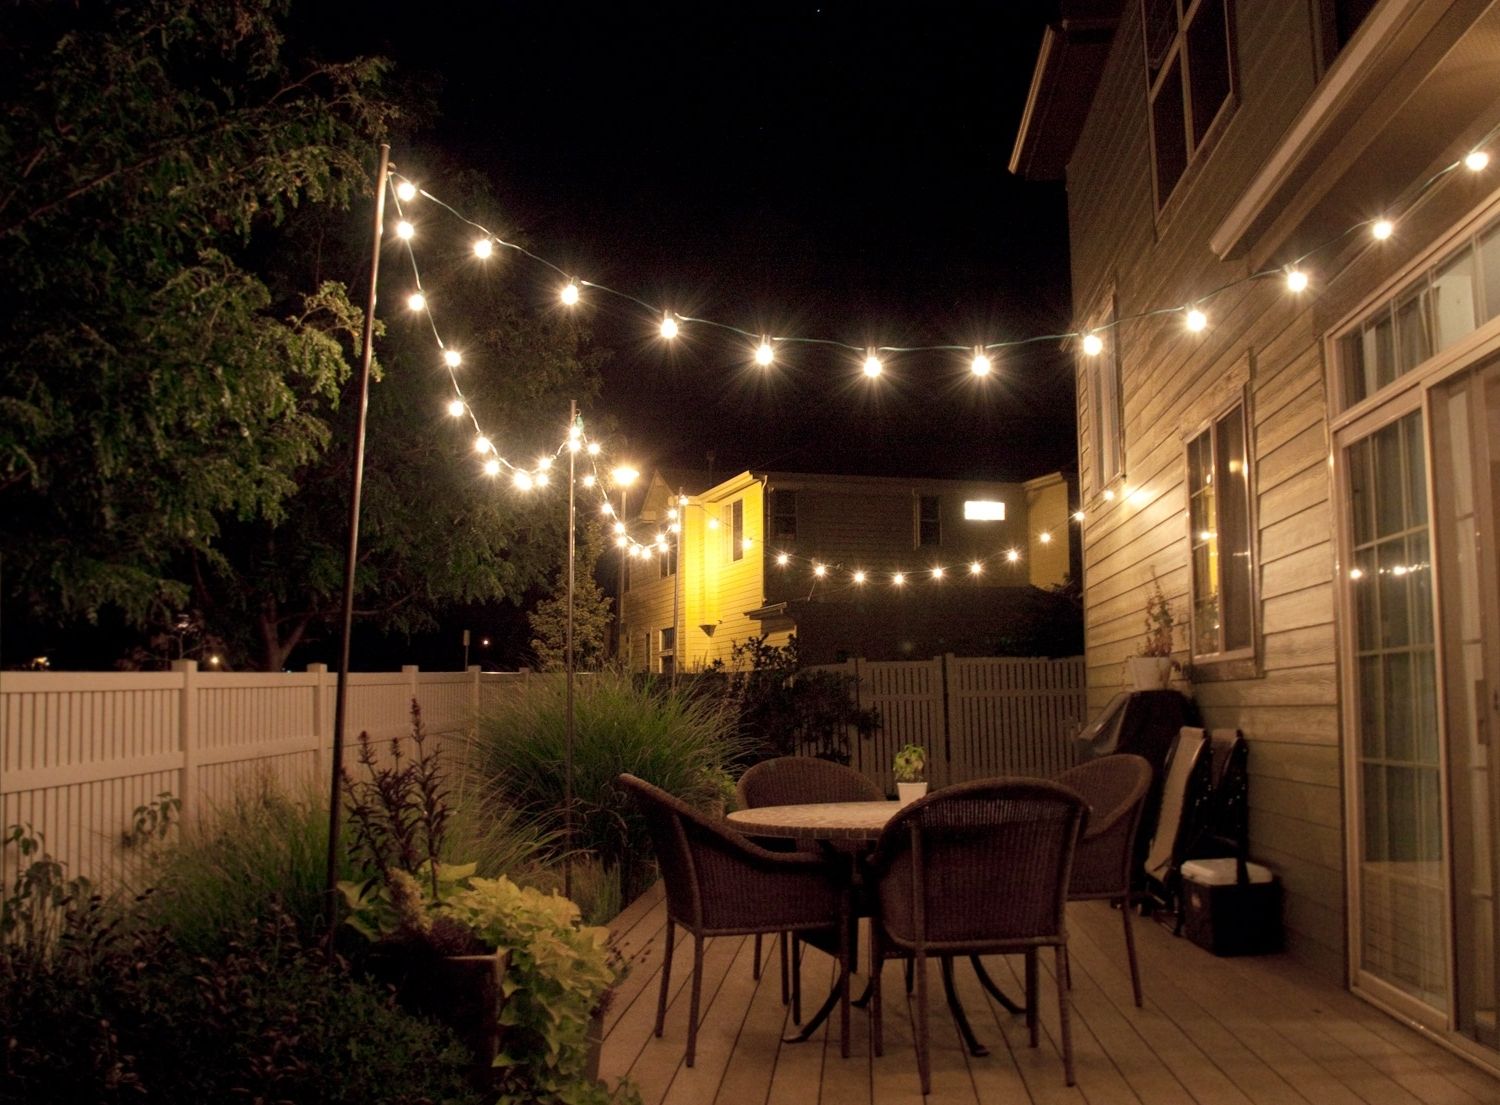 Battery Operated Lights For Outdoor Wedding – Outdoor Lighting Ideas Within Current Outdoor Battery Lanterns For Patio (View 6 of 20)